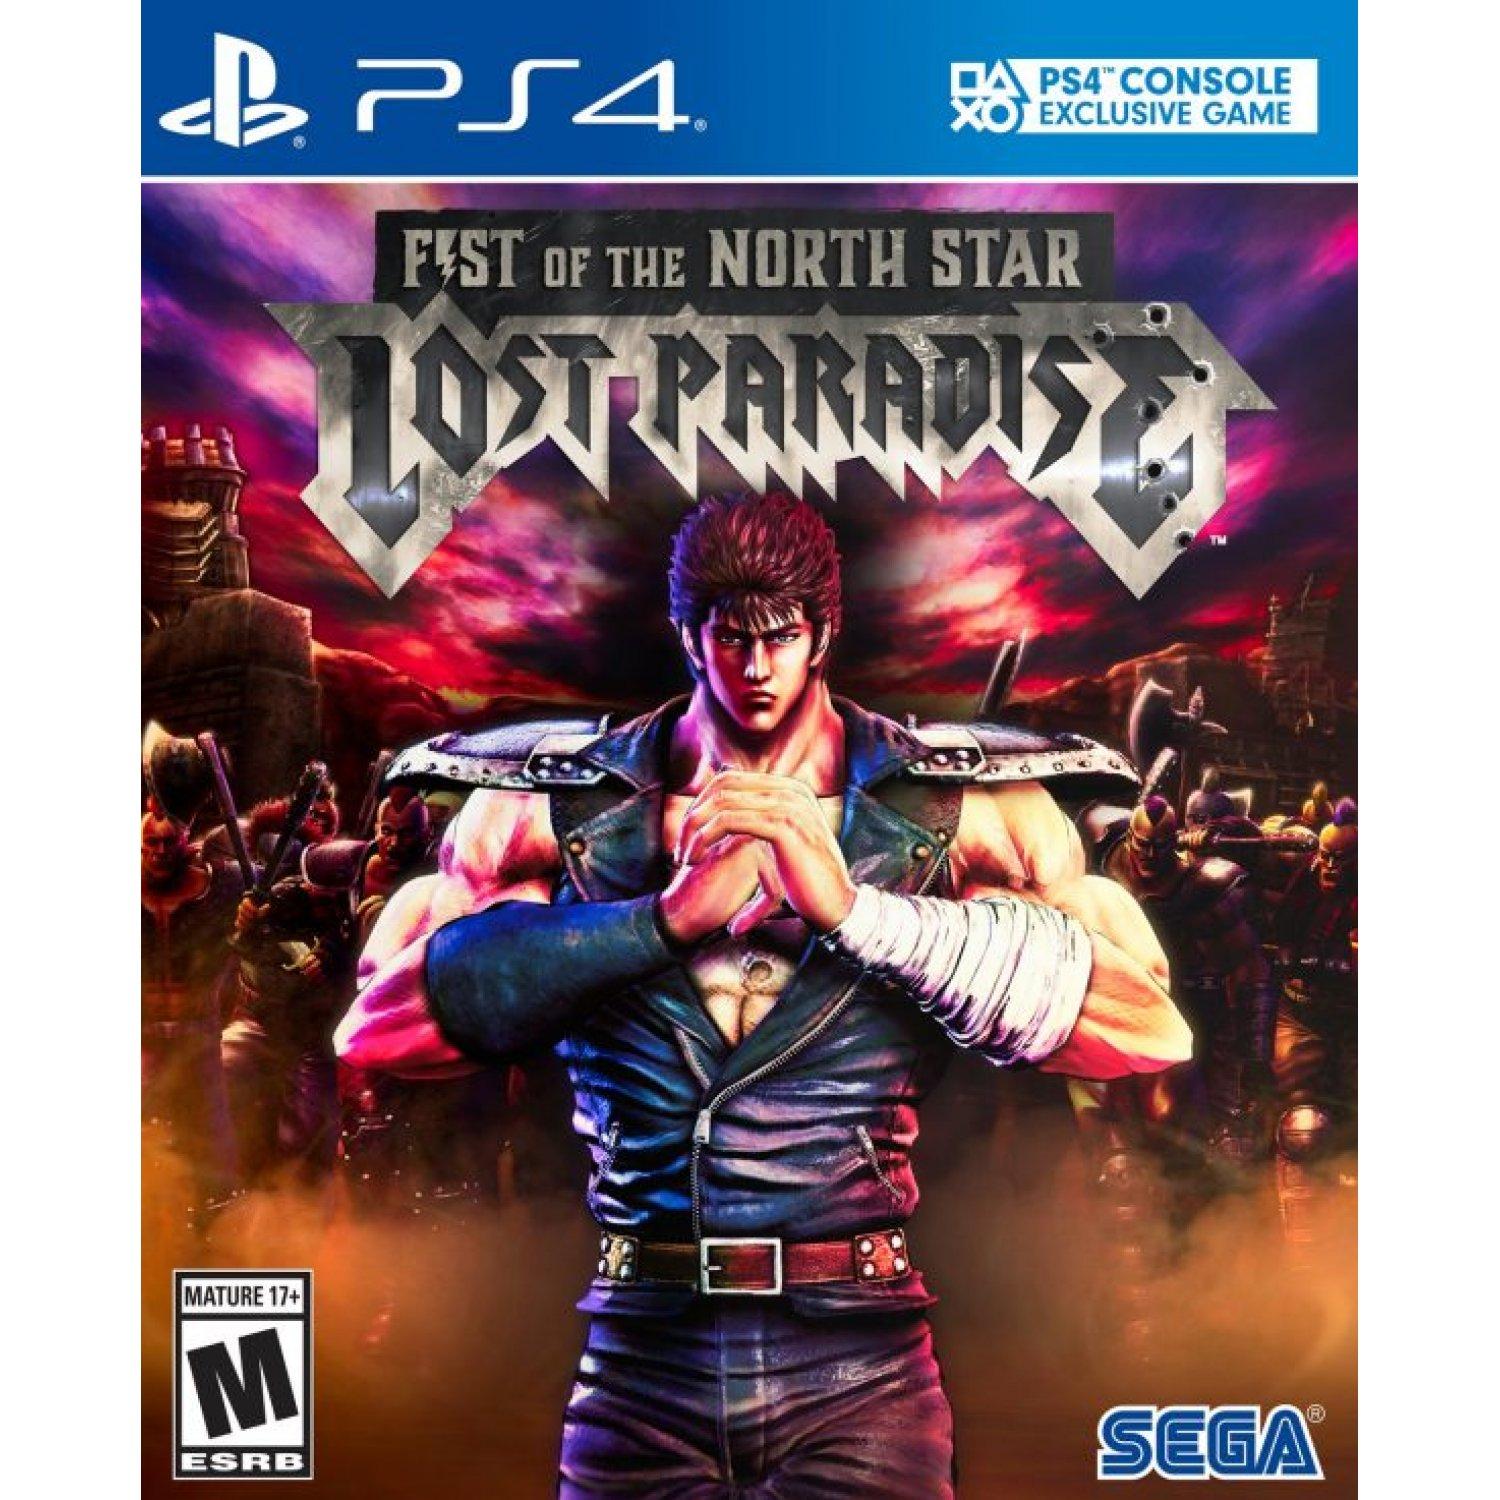 Đĩa Game PS4 - Fist of the North Star Lost Paradise - US